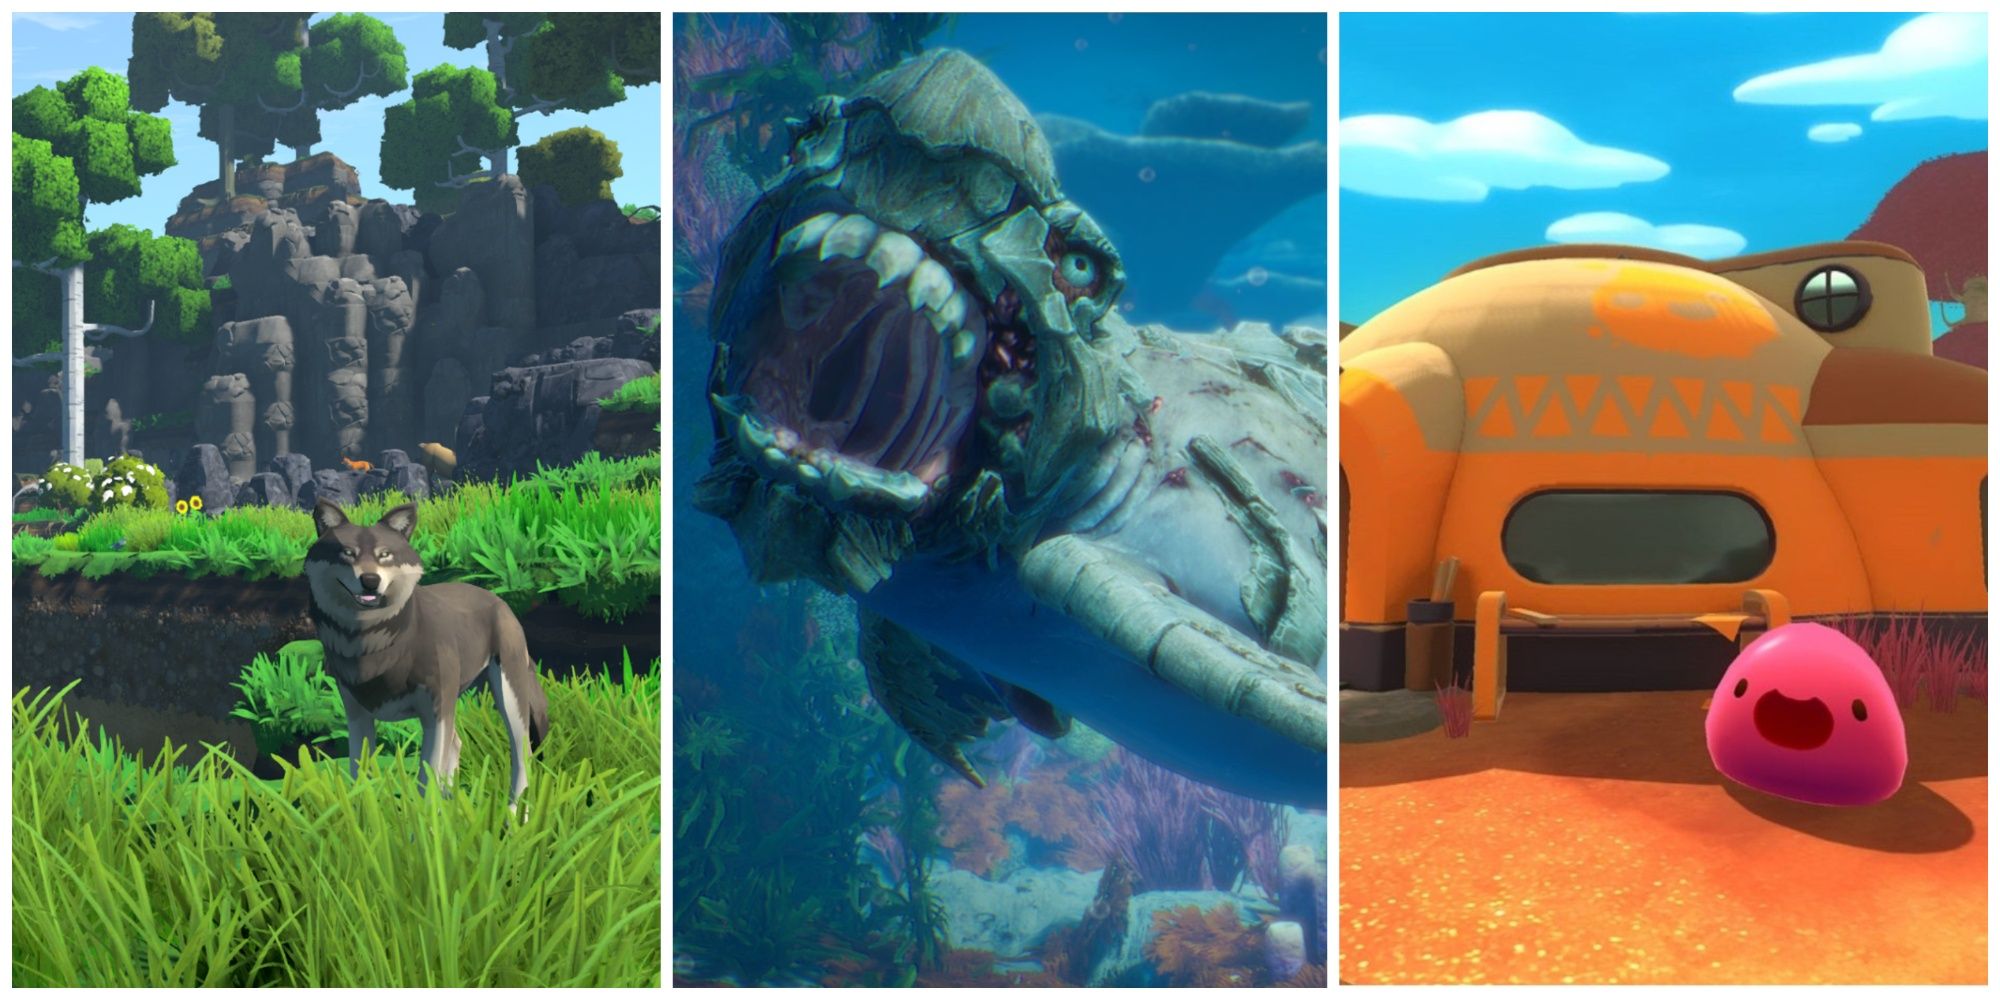 A trisplit of a wolf waiting in grass from Eco, a shark with an armoured head in Maneater, and a happy pink slime in front of a house in Slime Rancher